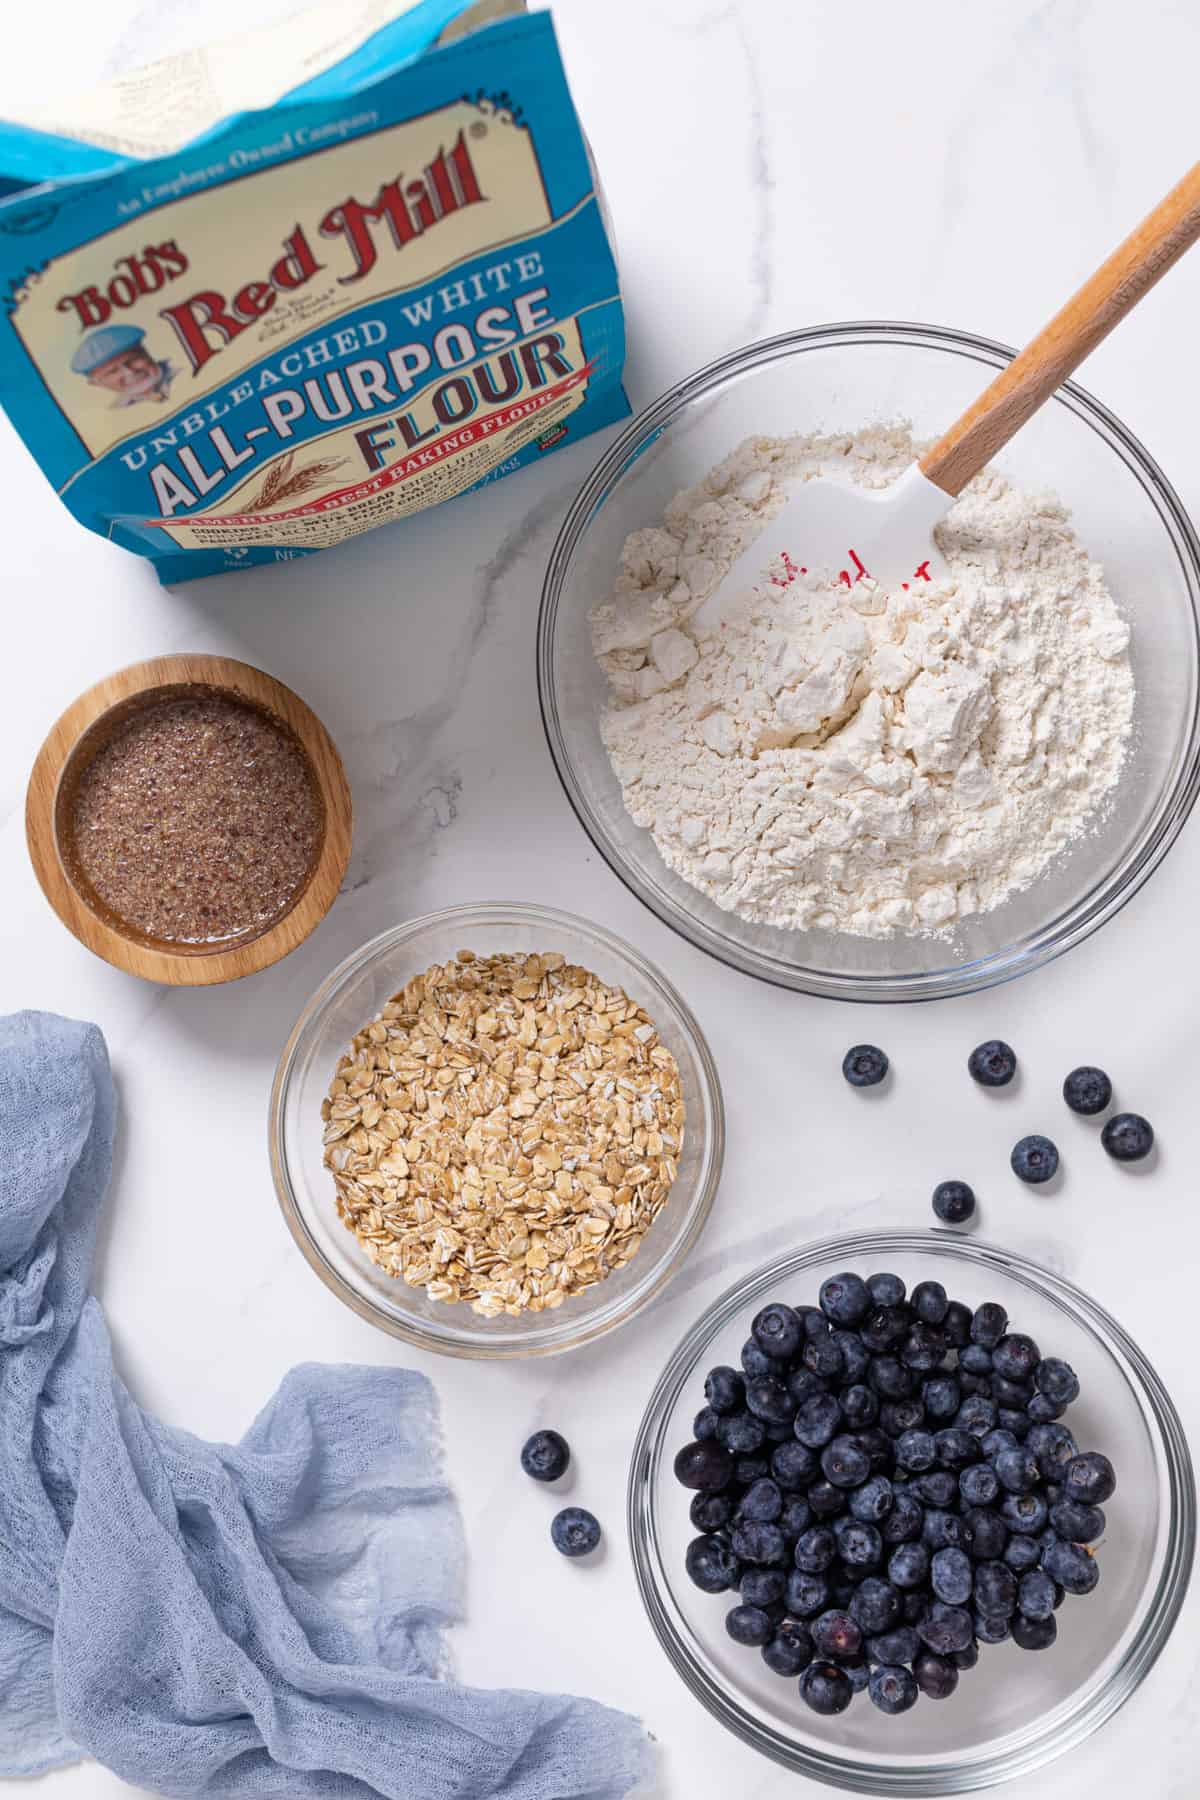 Bowls of flour, oats, blueberries, and other ingredients.